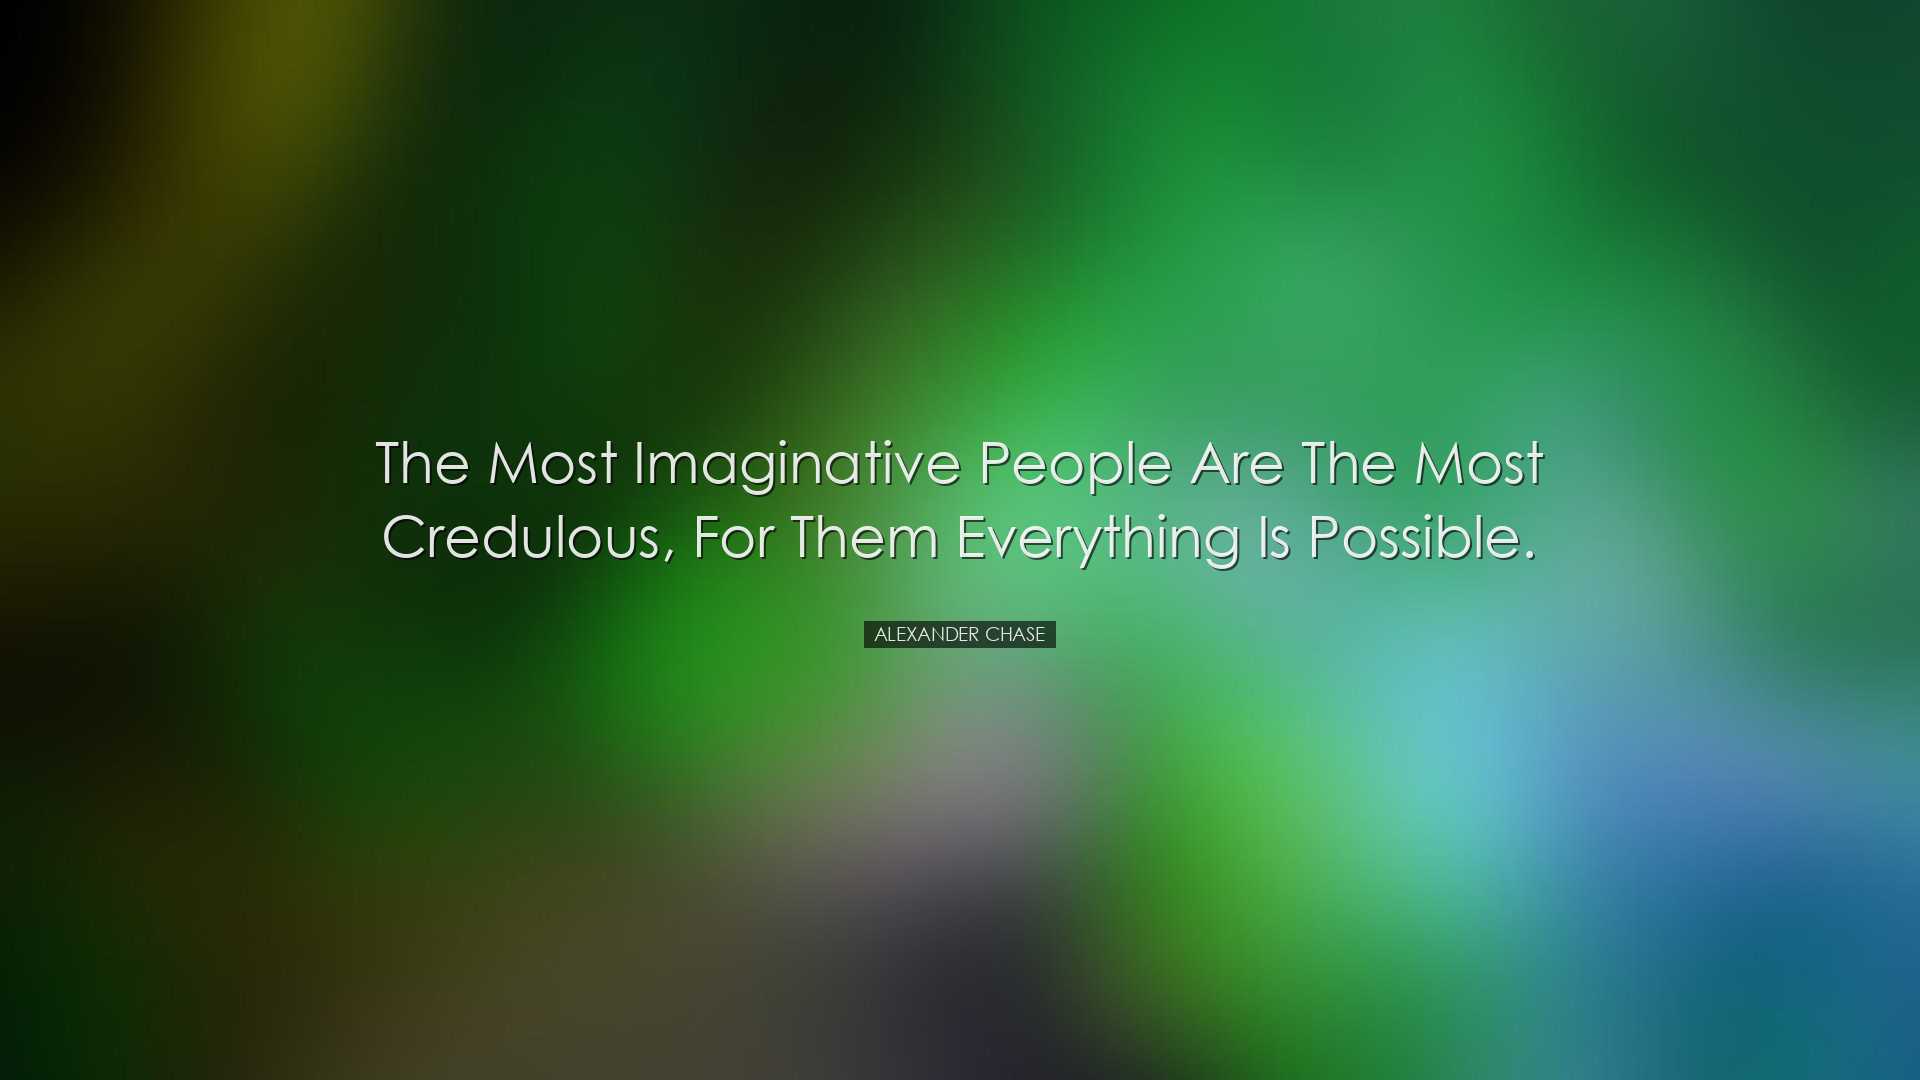 The most imaginative people are the most credulous, for them every